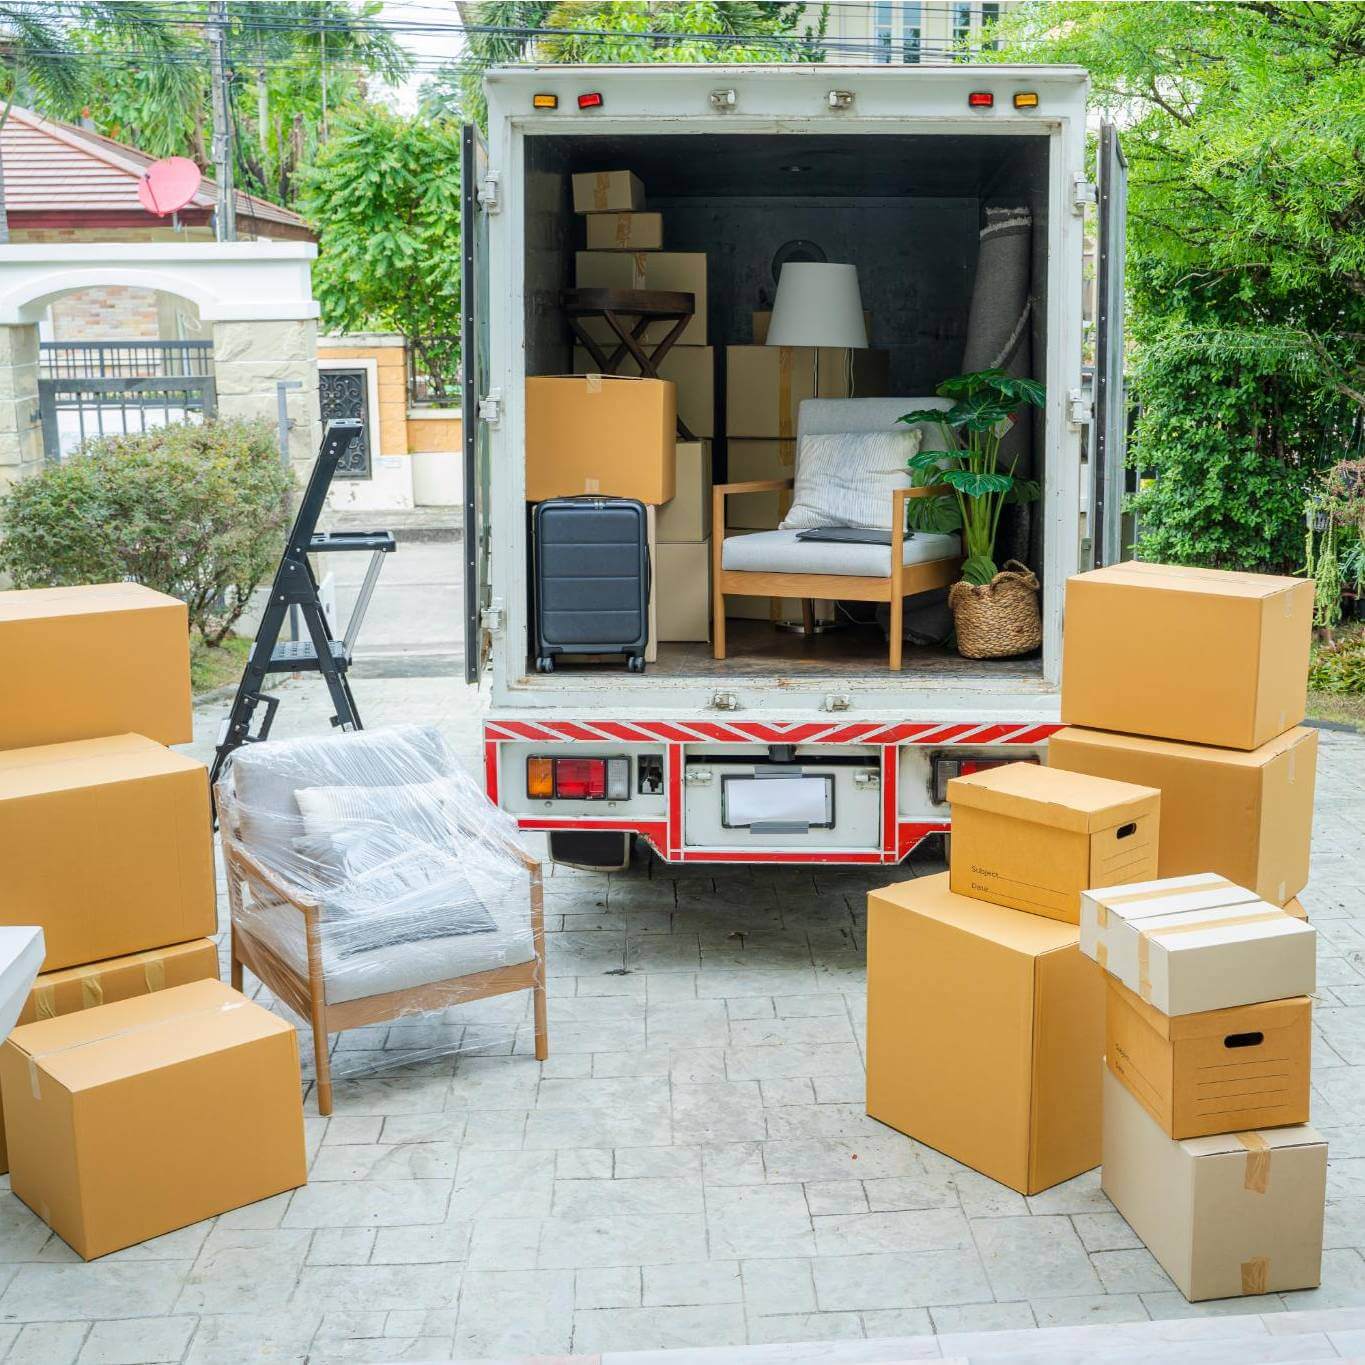 Local Moving Company - All Around Movers